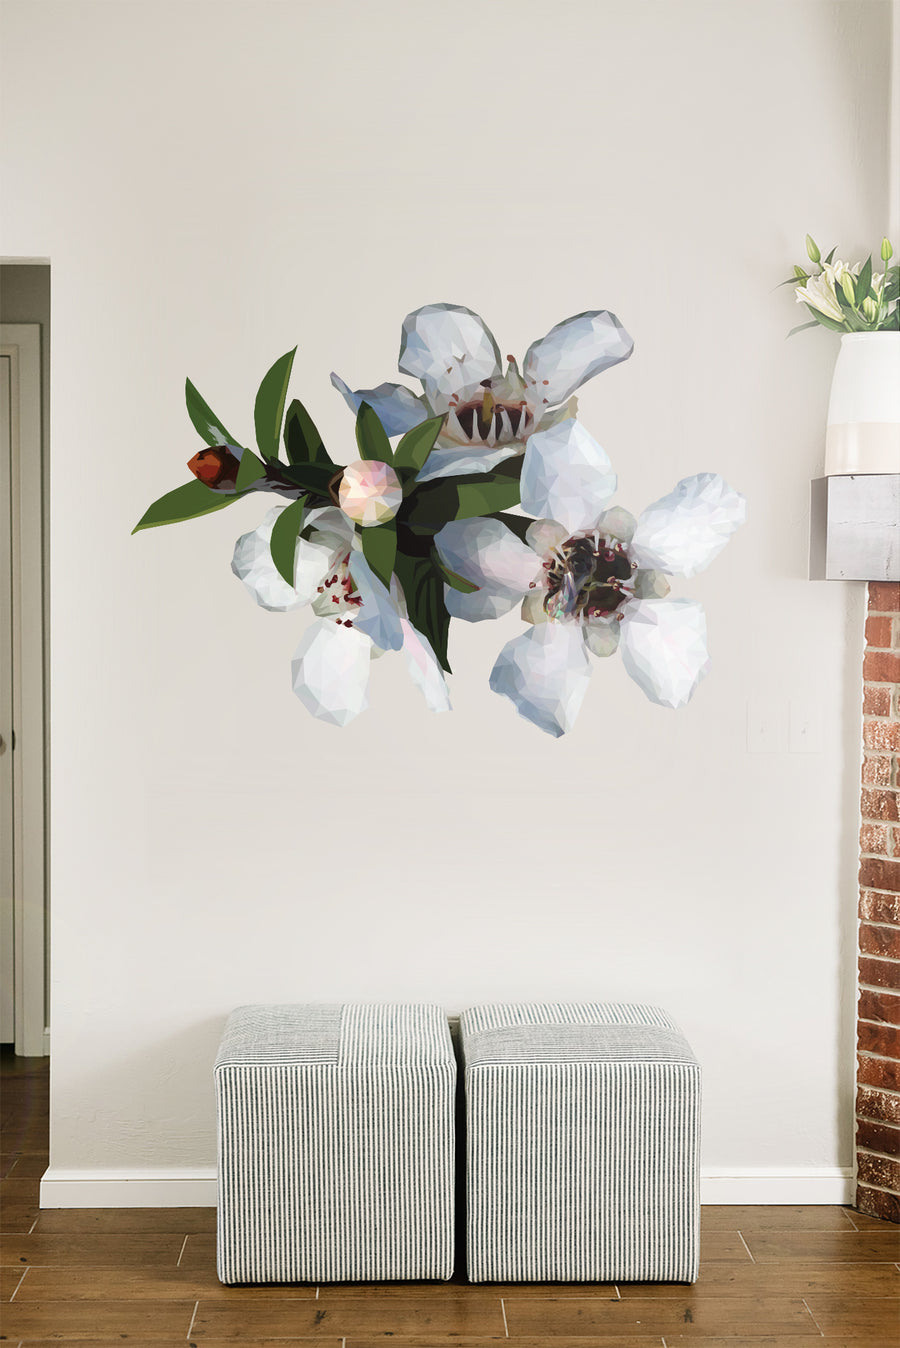 Manuka Flower Wall Decal Your Decal Shop Wall Decal NZ